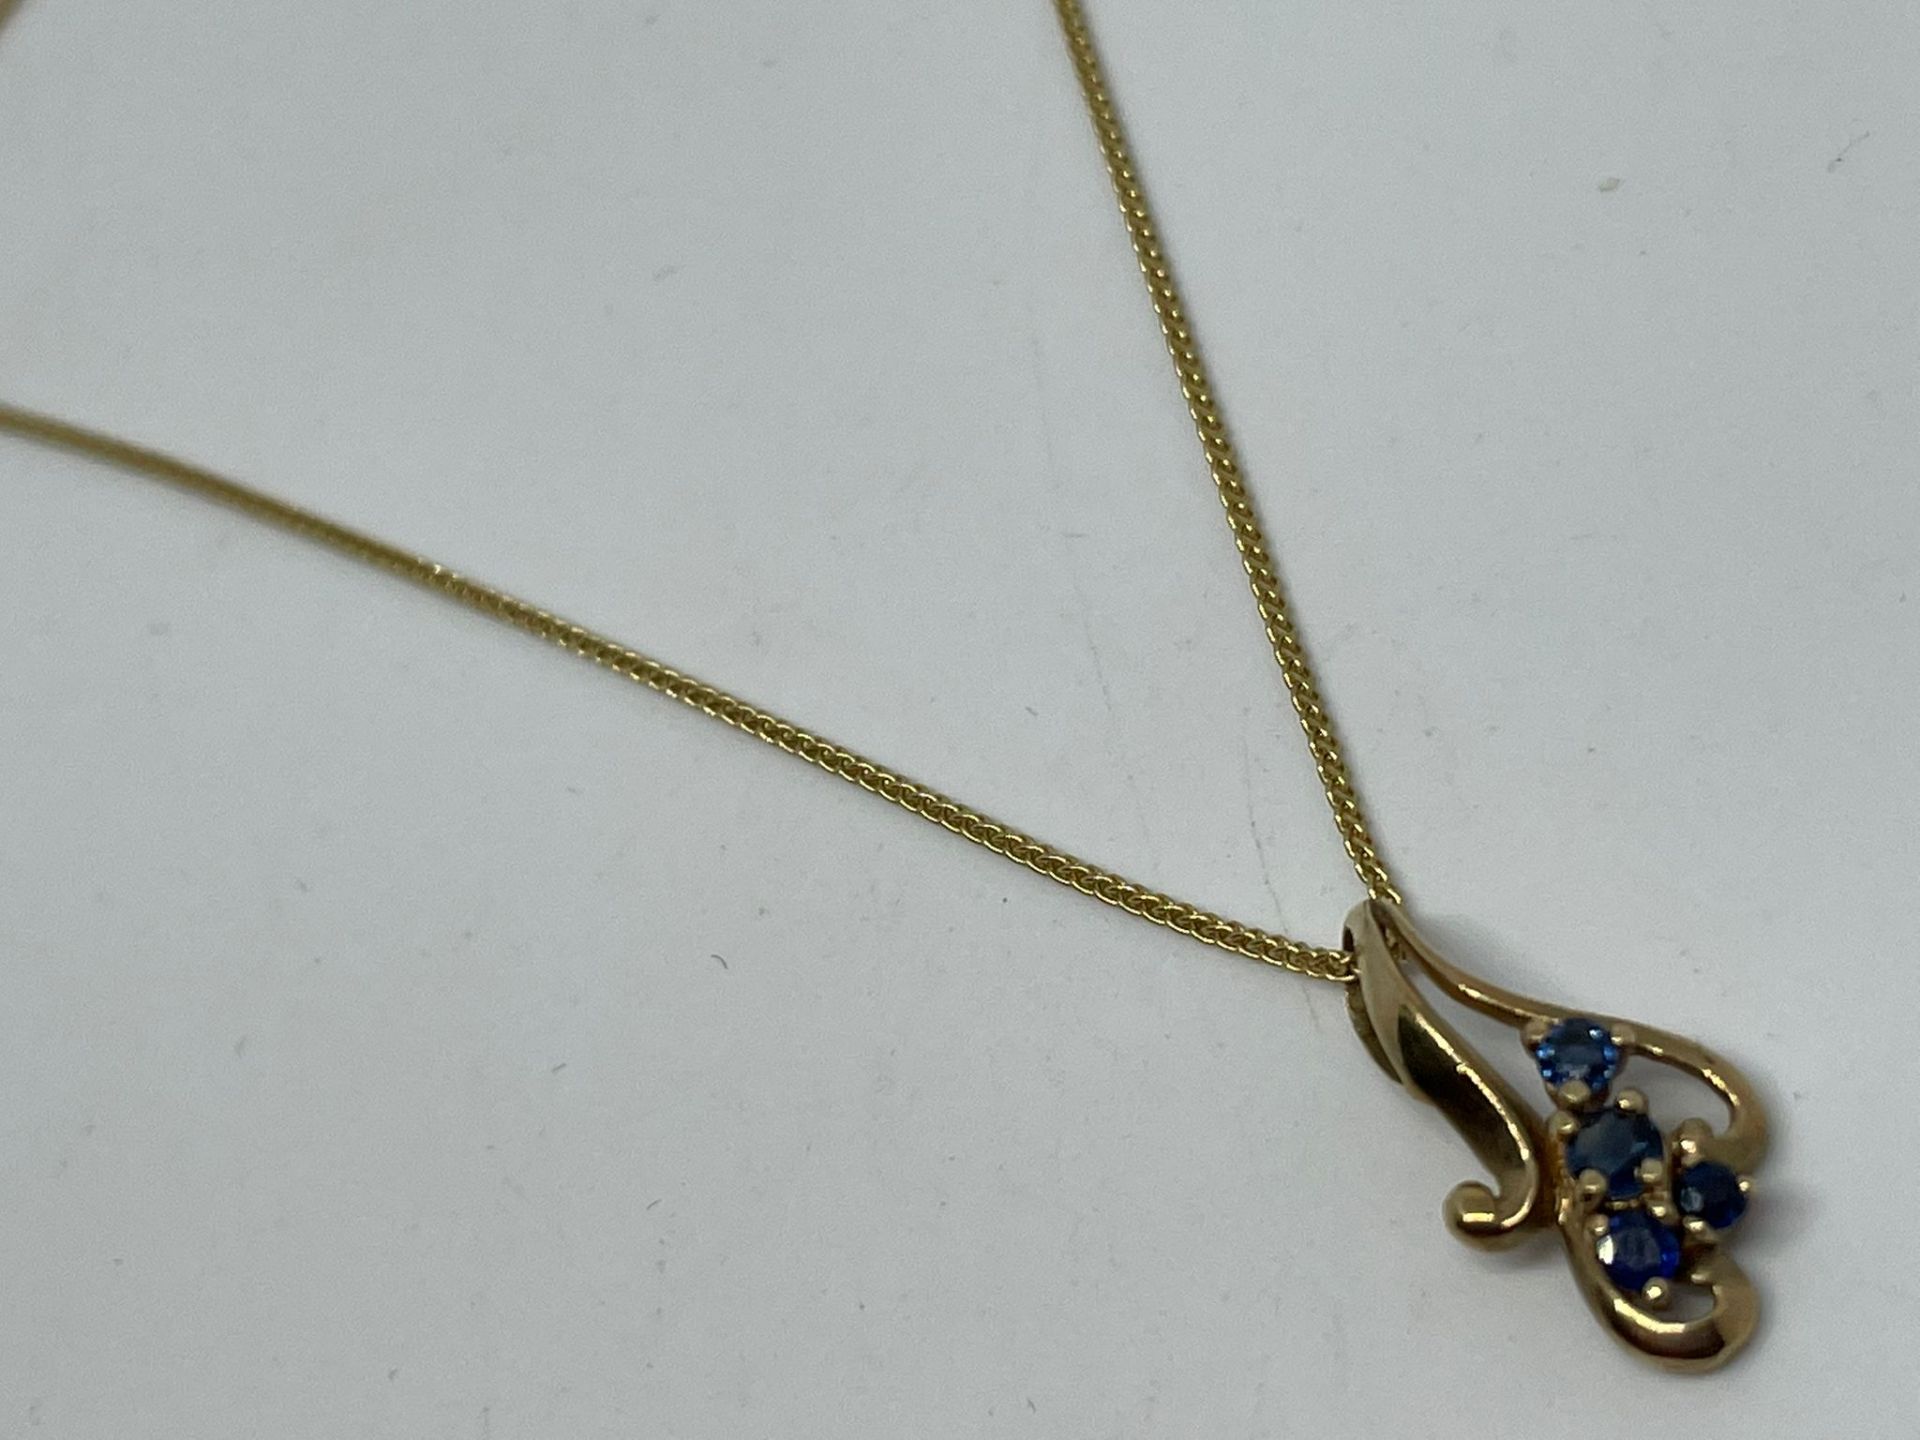 9ct gold sapphire pendant and chain - Image 2 of 2